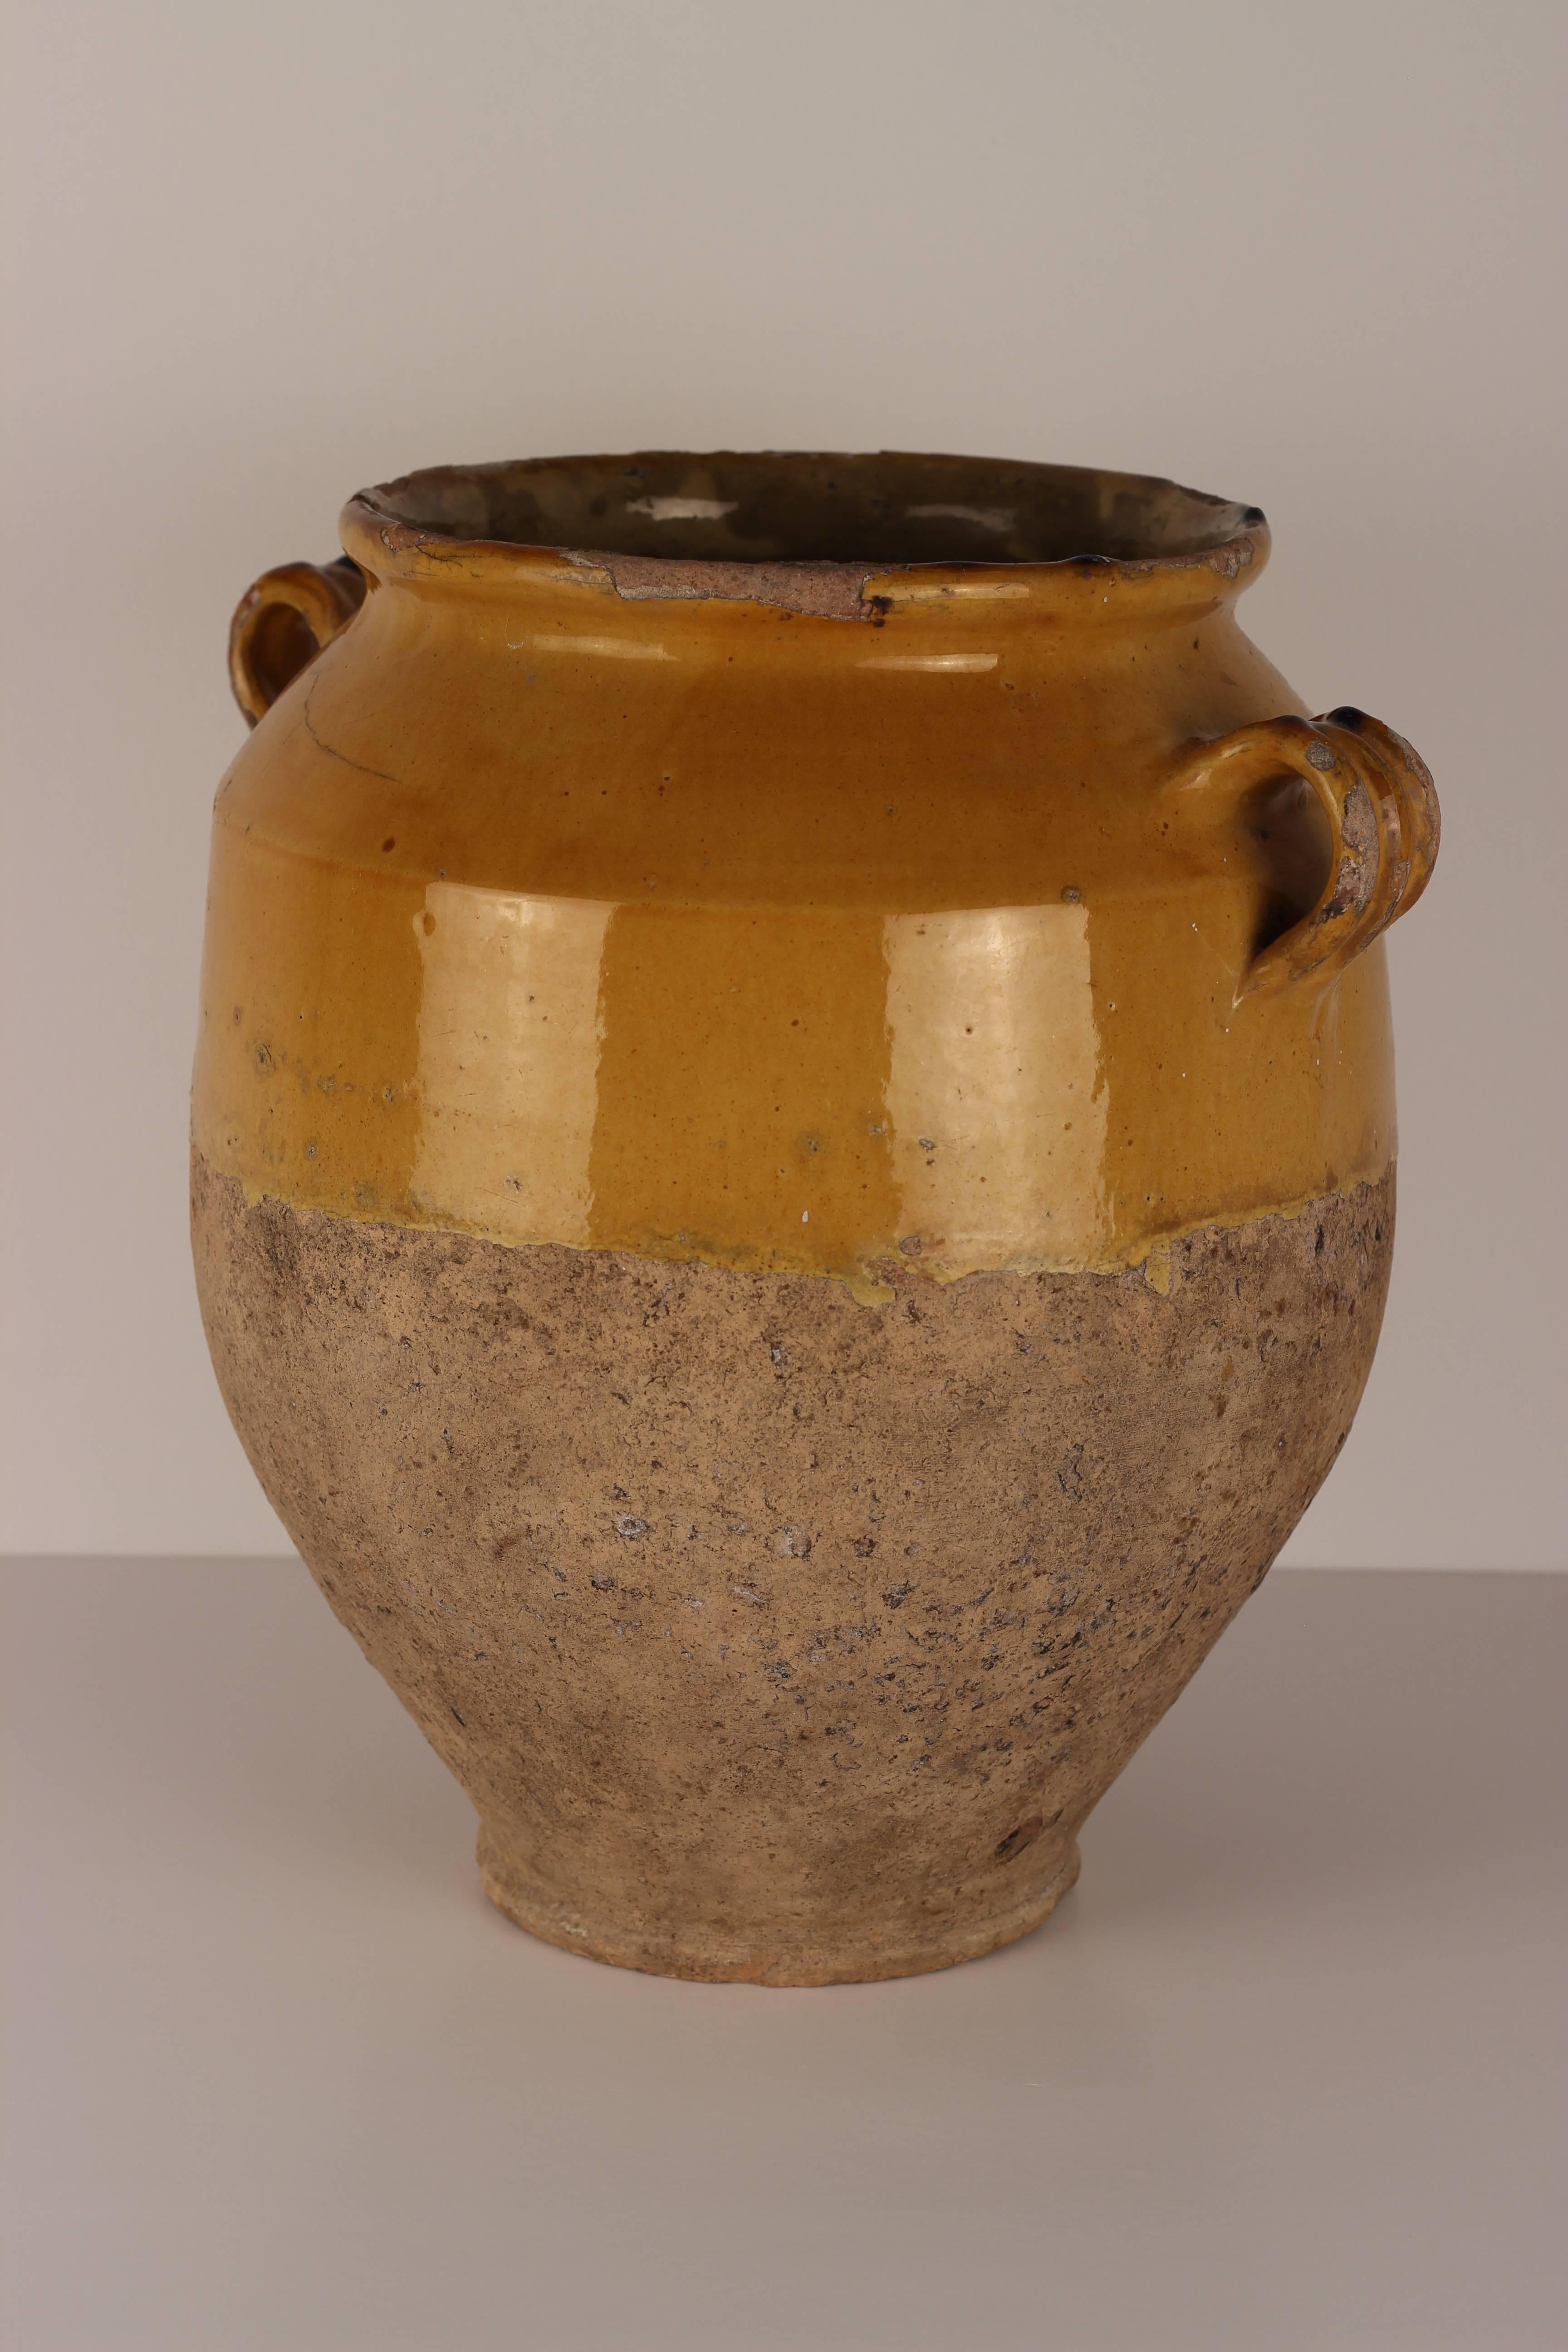 Hand-Crafted Confit Pot from the South of France, 19th Century